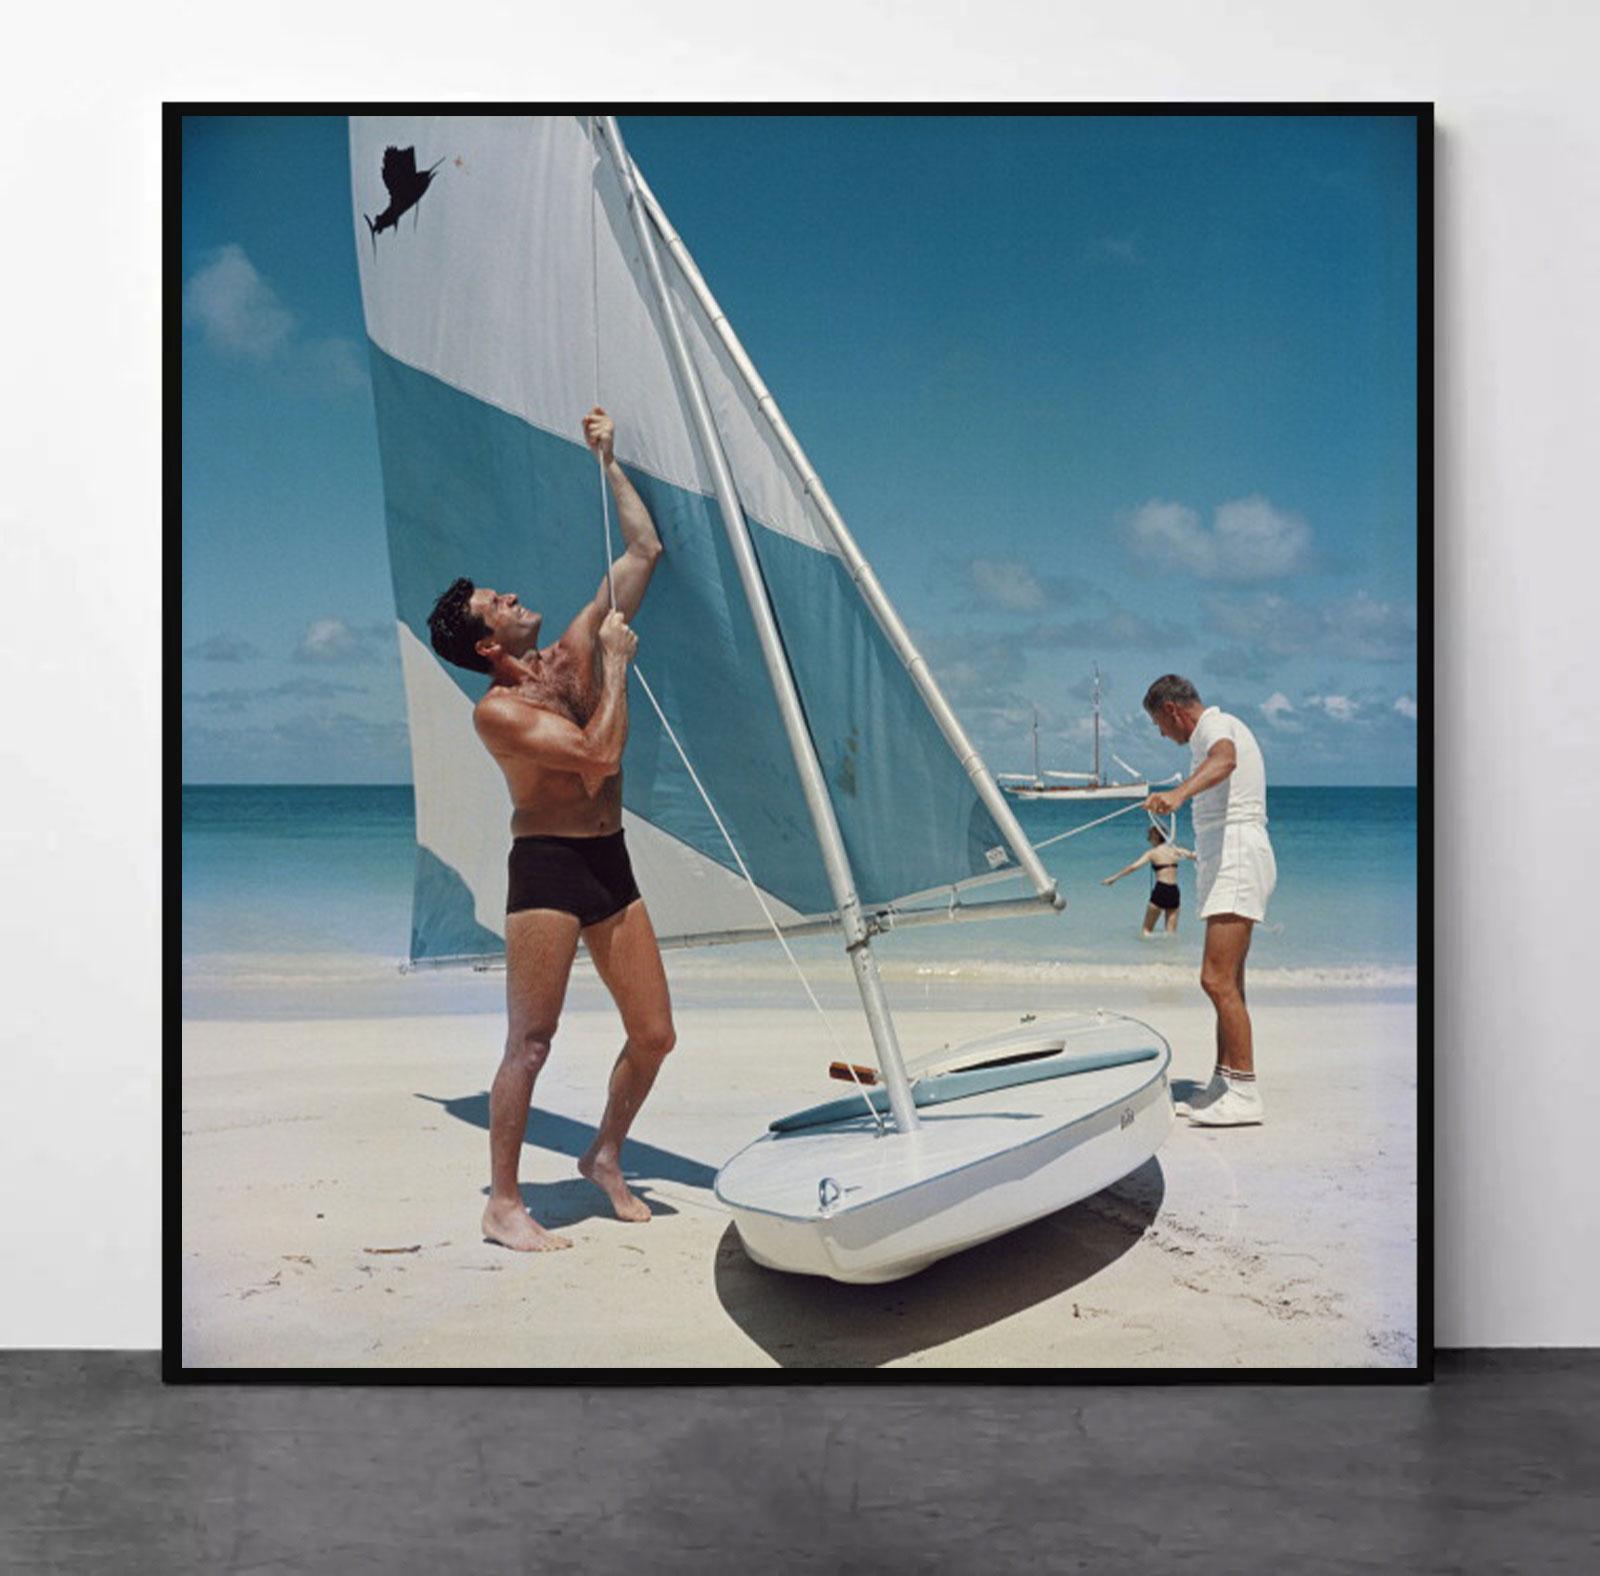 Slim Aarons
Boating In Antigua
1961 (printed later)
C print
Estate stamped and numbered edition of 150 
with Certificate of authenticity
Caption: American actor Hugh O'Brian (left) hoists the sail on a dinghy, Antigua, West Indies, 1961. (Photo by